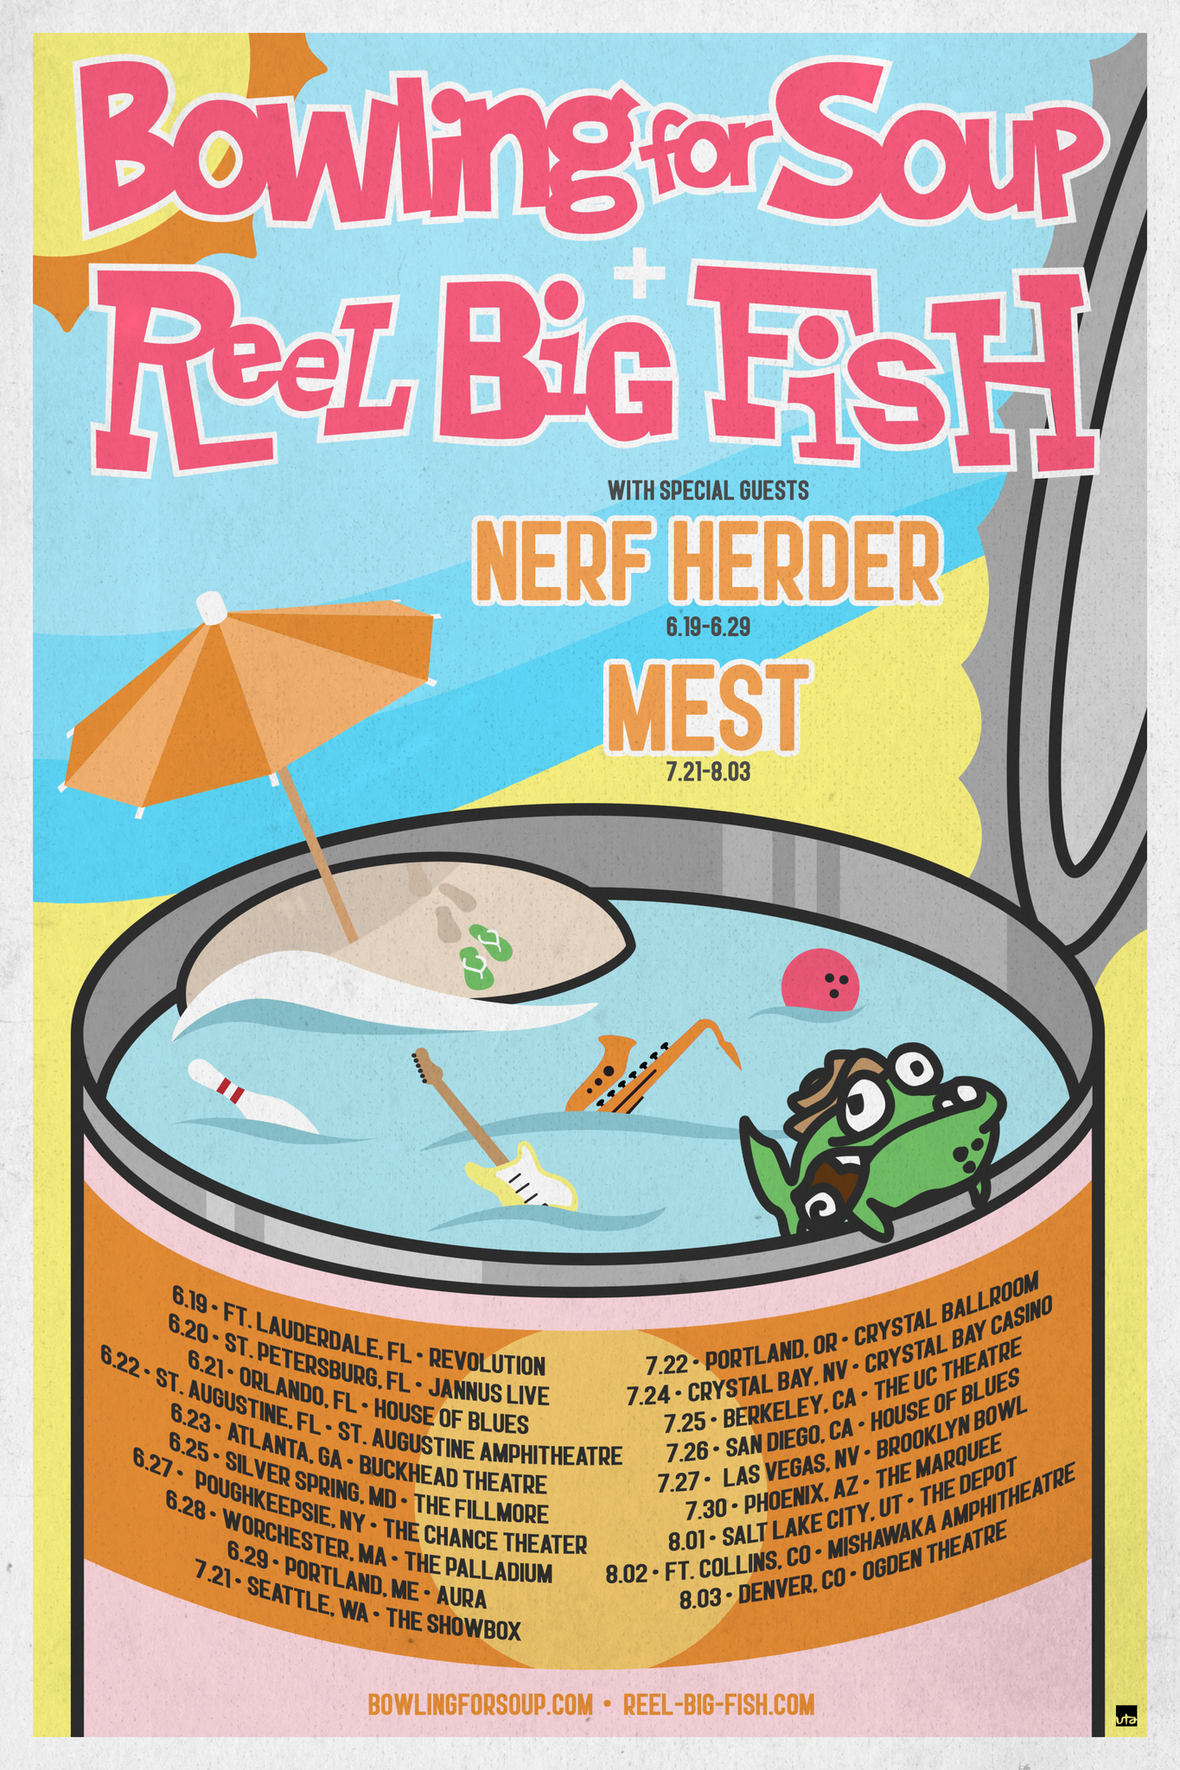 Reel Big Fish & Bowling For Soup Announce CoHeadline Tour with Special